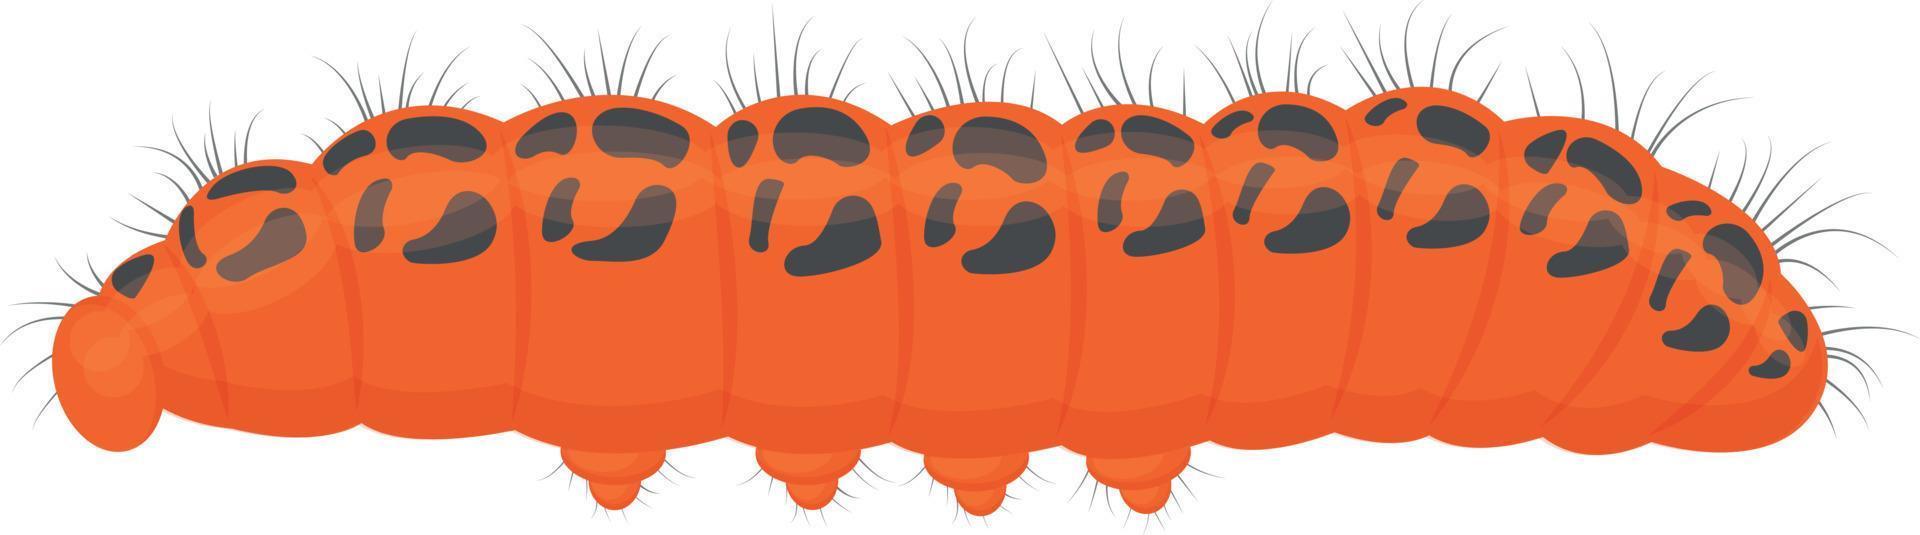 The bright caterpillar is bright orange in color. The insect is an agricultural pest. Vector illustration isolated on a white background